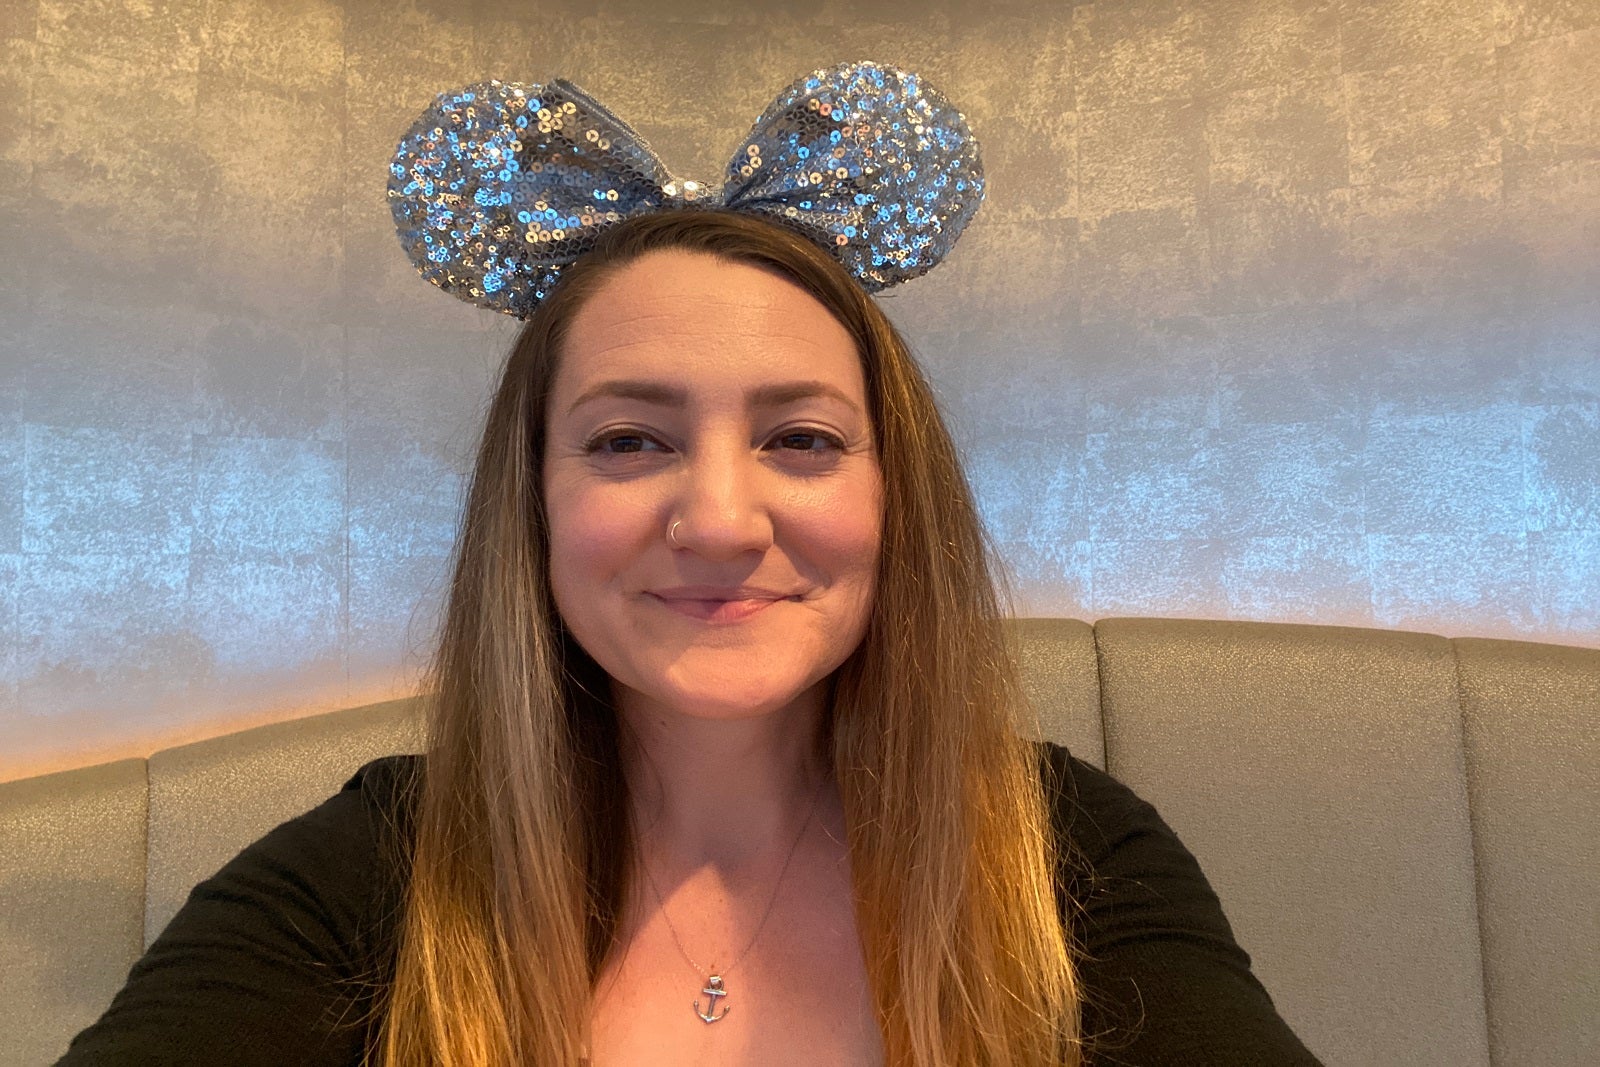 A photo of a woman wearing glittery Minnie Mouse ears